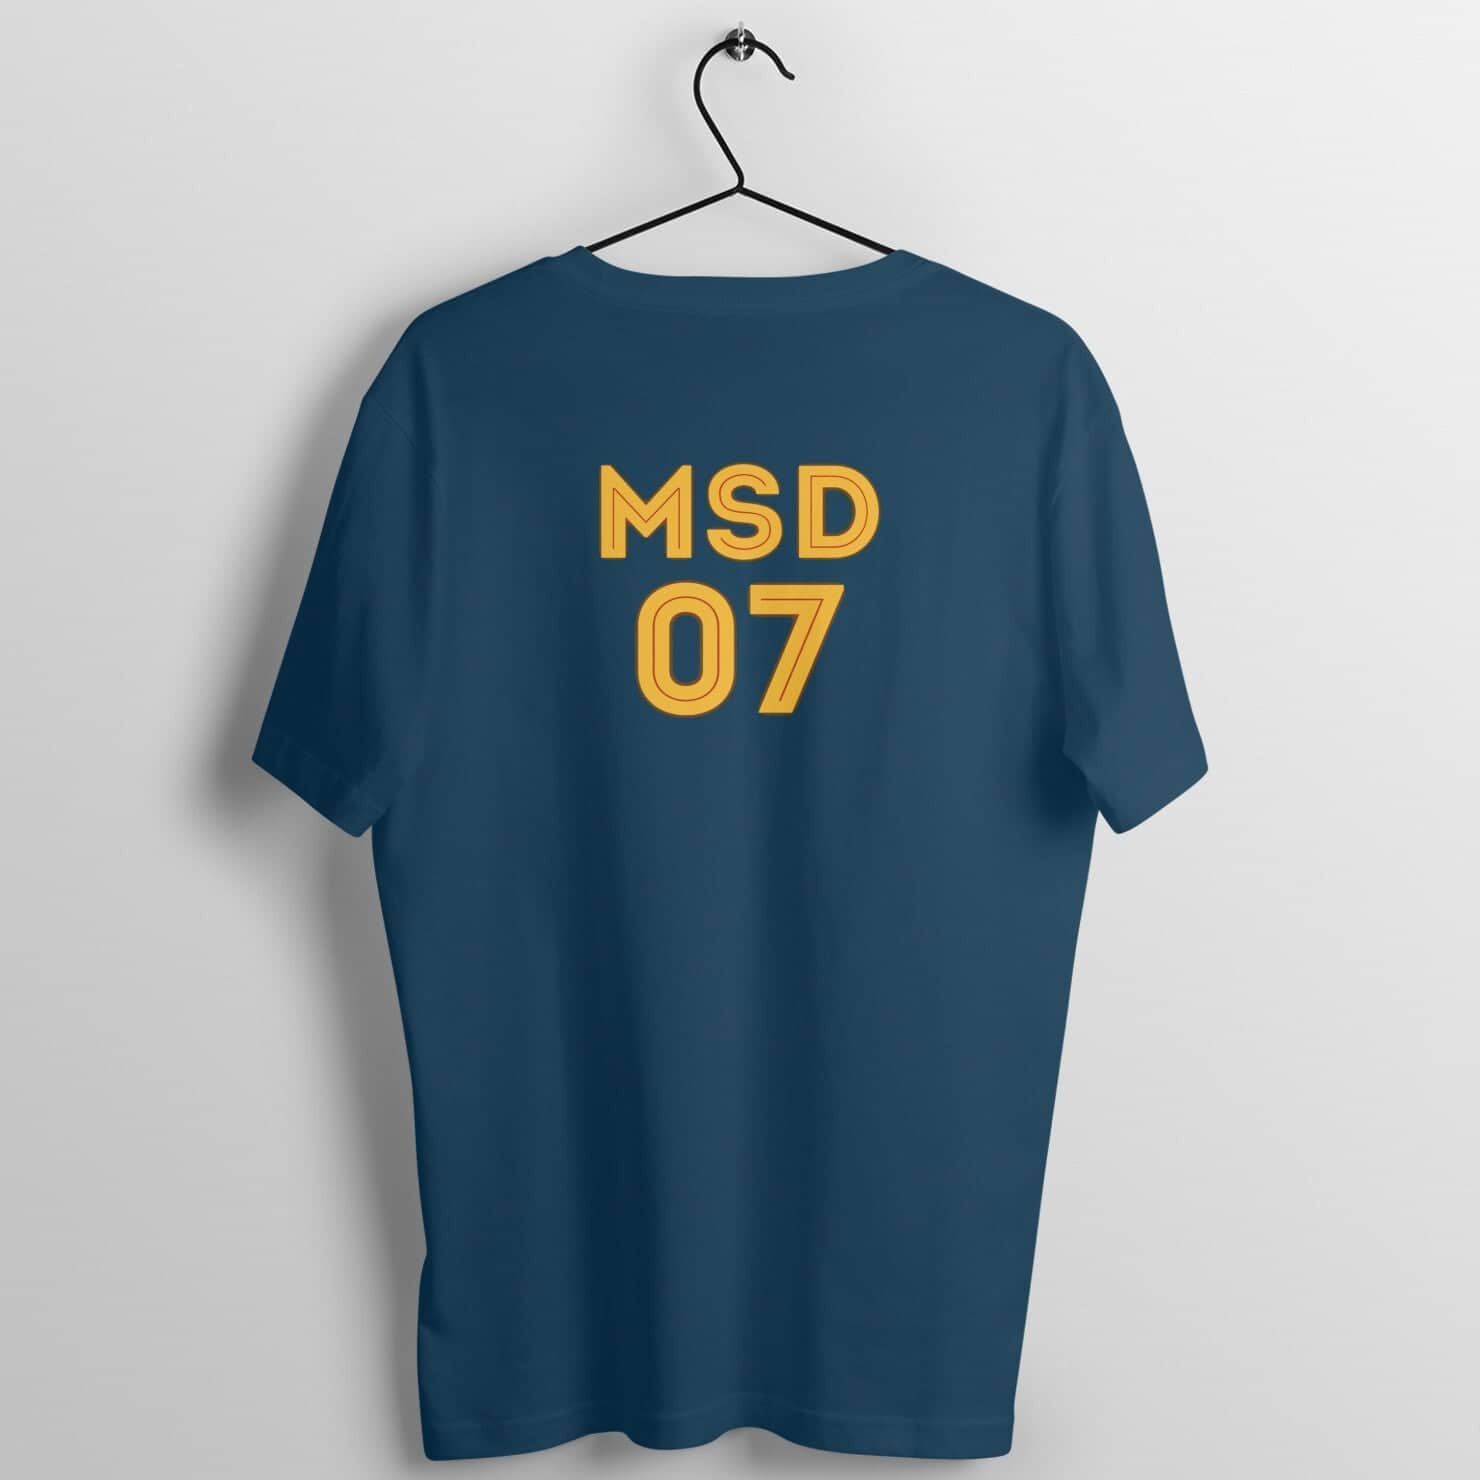 MSD 07 Special Navy Blue Back Printed Jersey T Shirt for Men and Women Shirts & Tops Printrove 